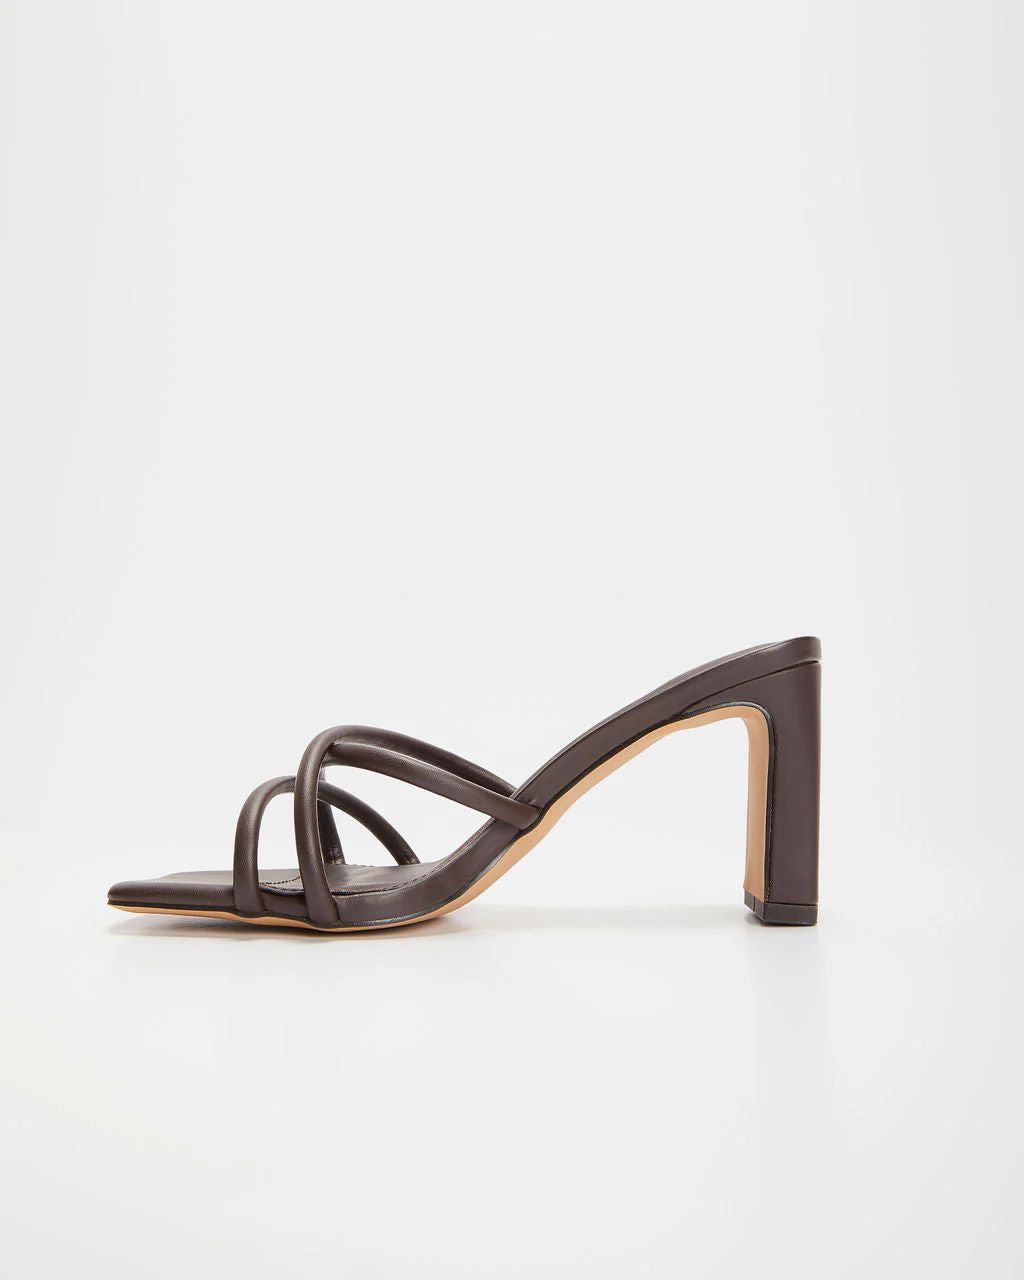 Kalis Strappy Heels | VICI Collection